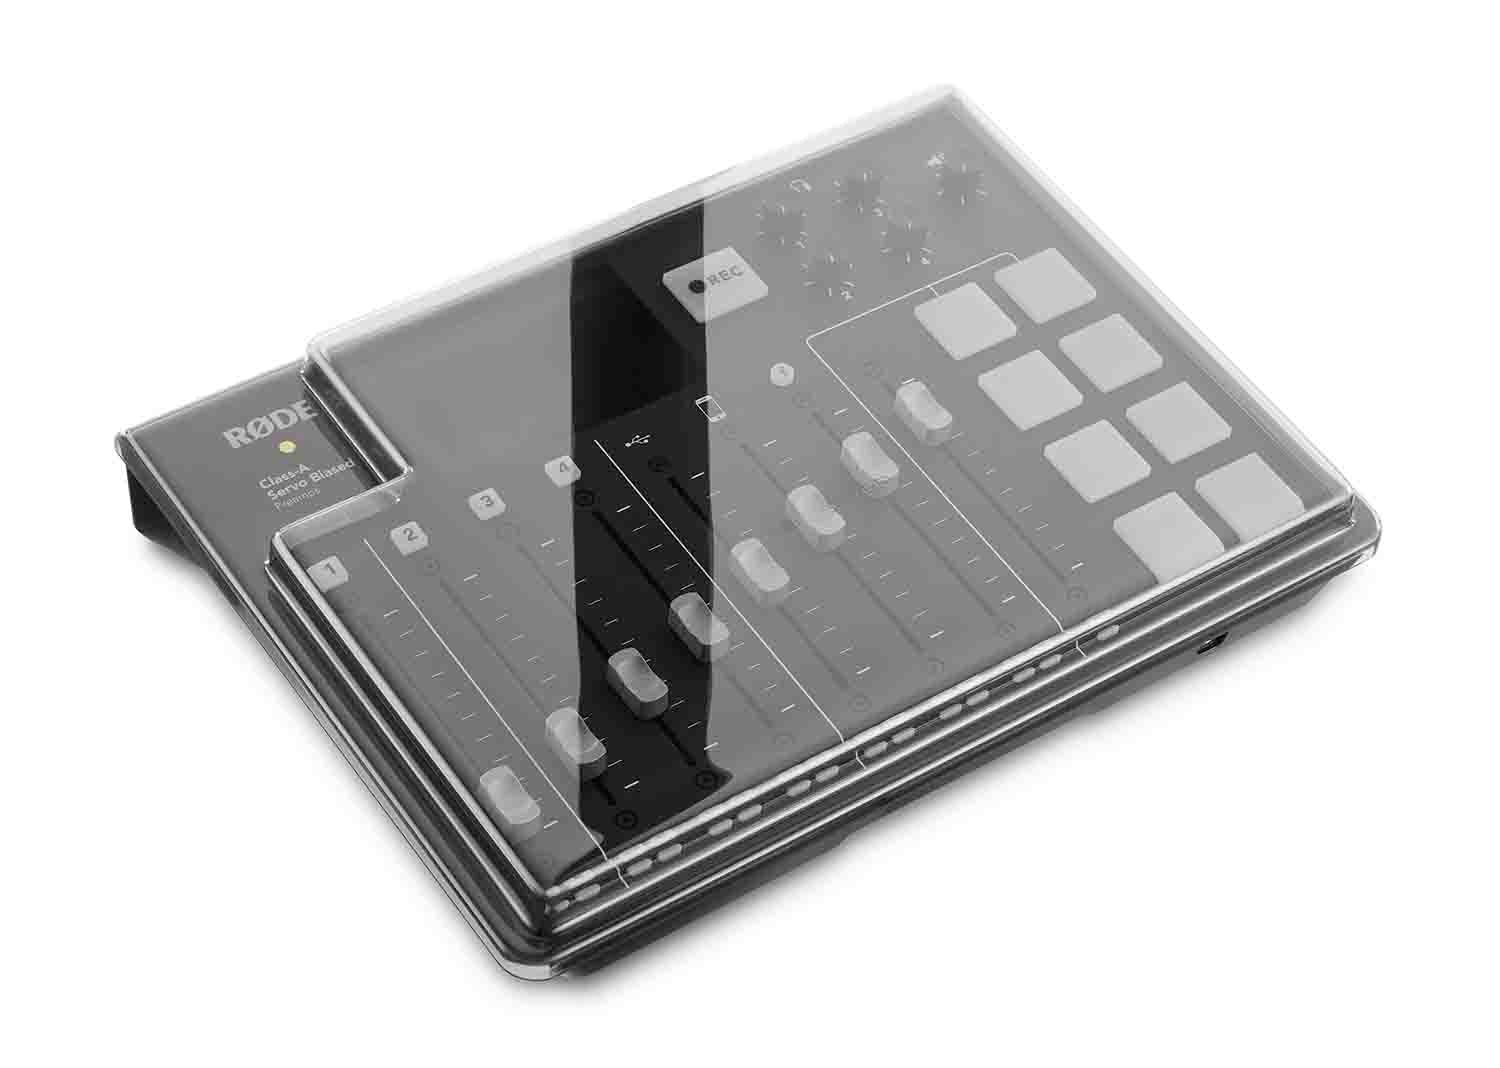 B-Stock: Decksaver DS-PC-RCASTERPRO Protection Cover for RODECaster Pro Production Studio - Hollywood DJ